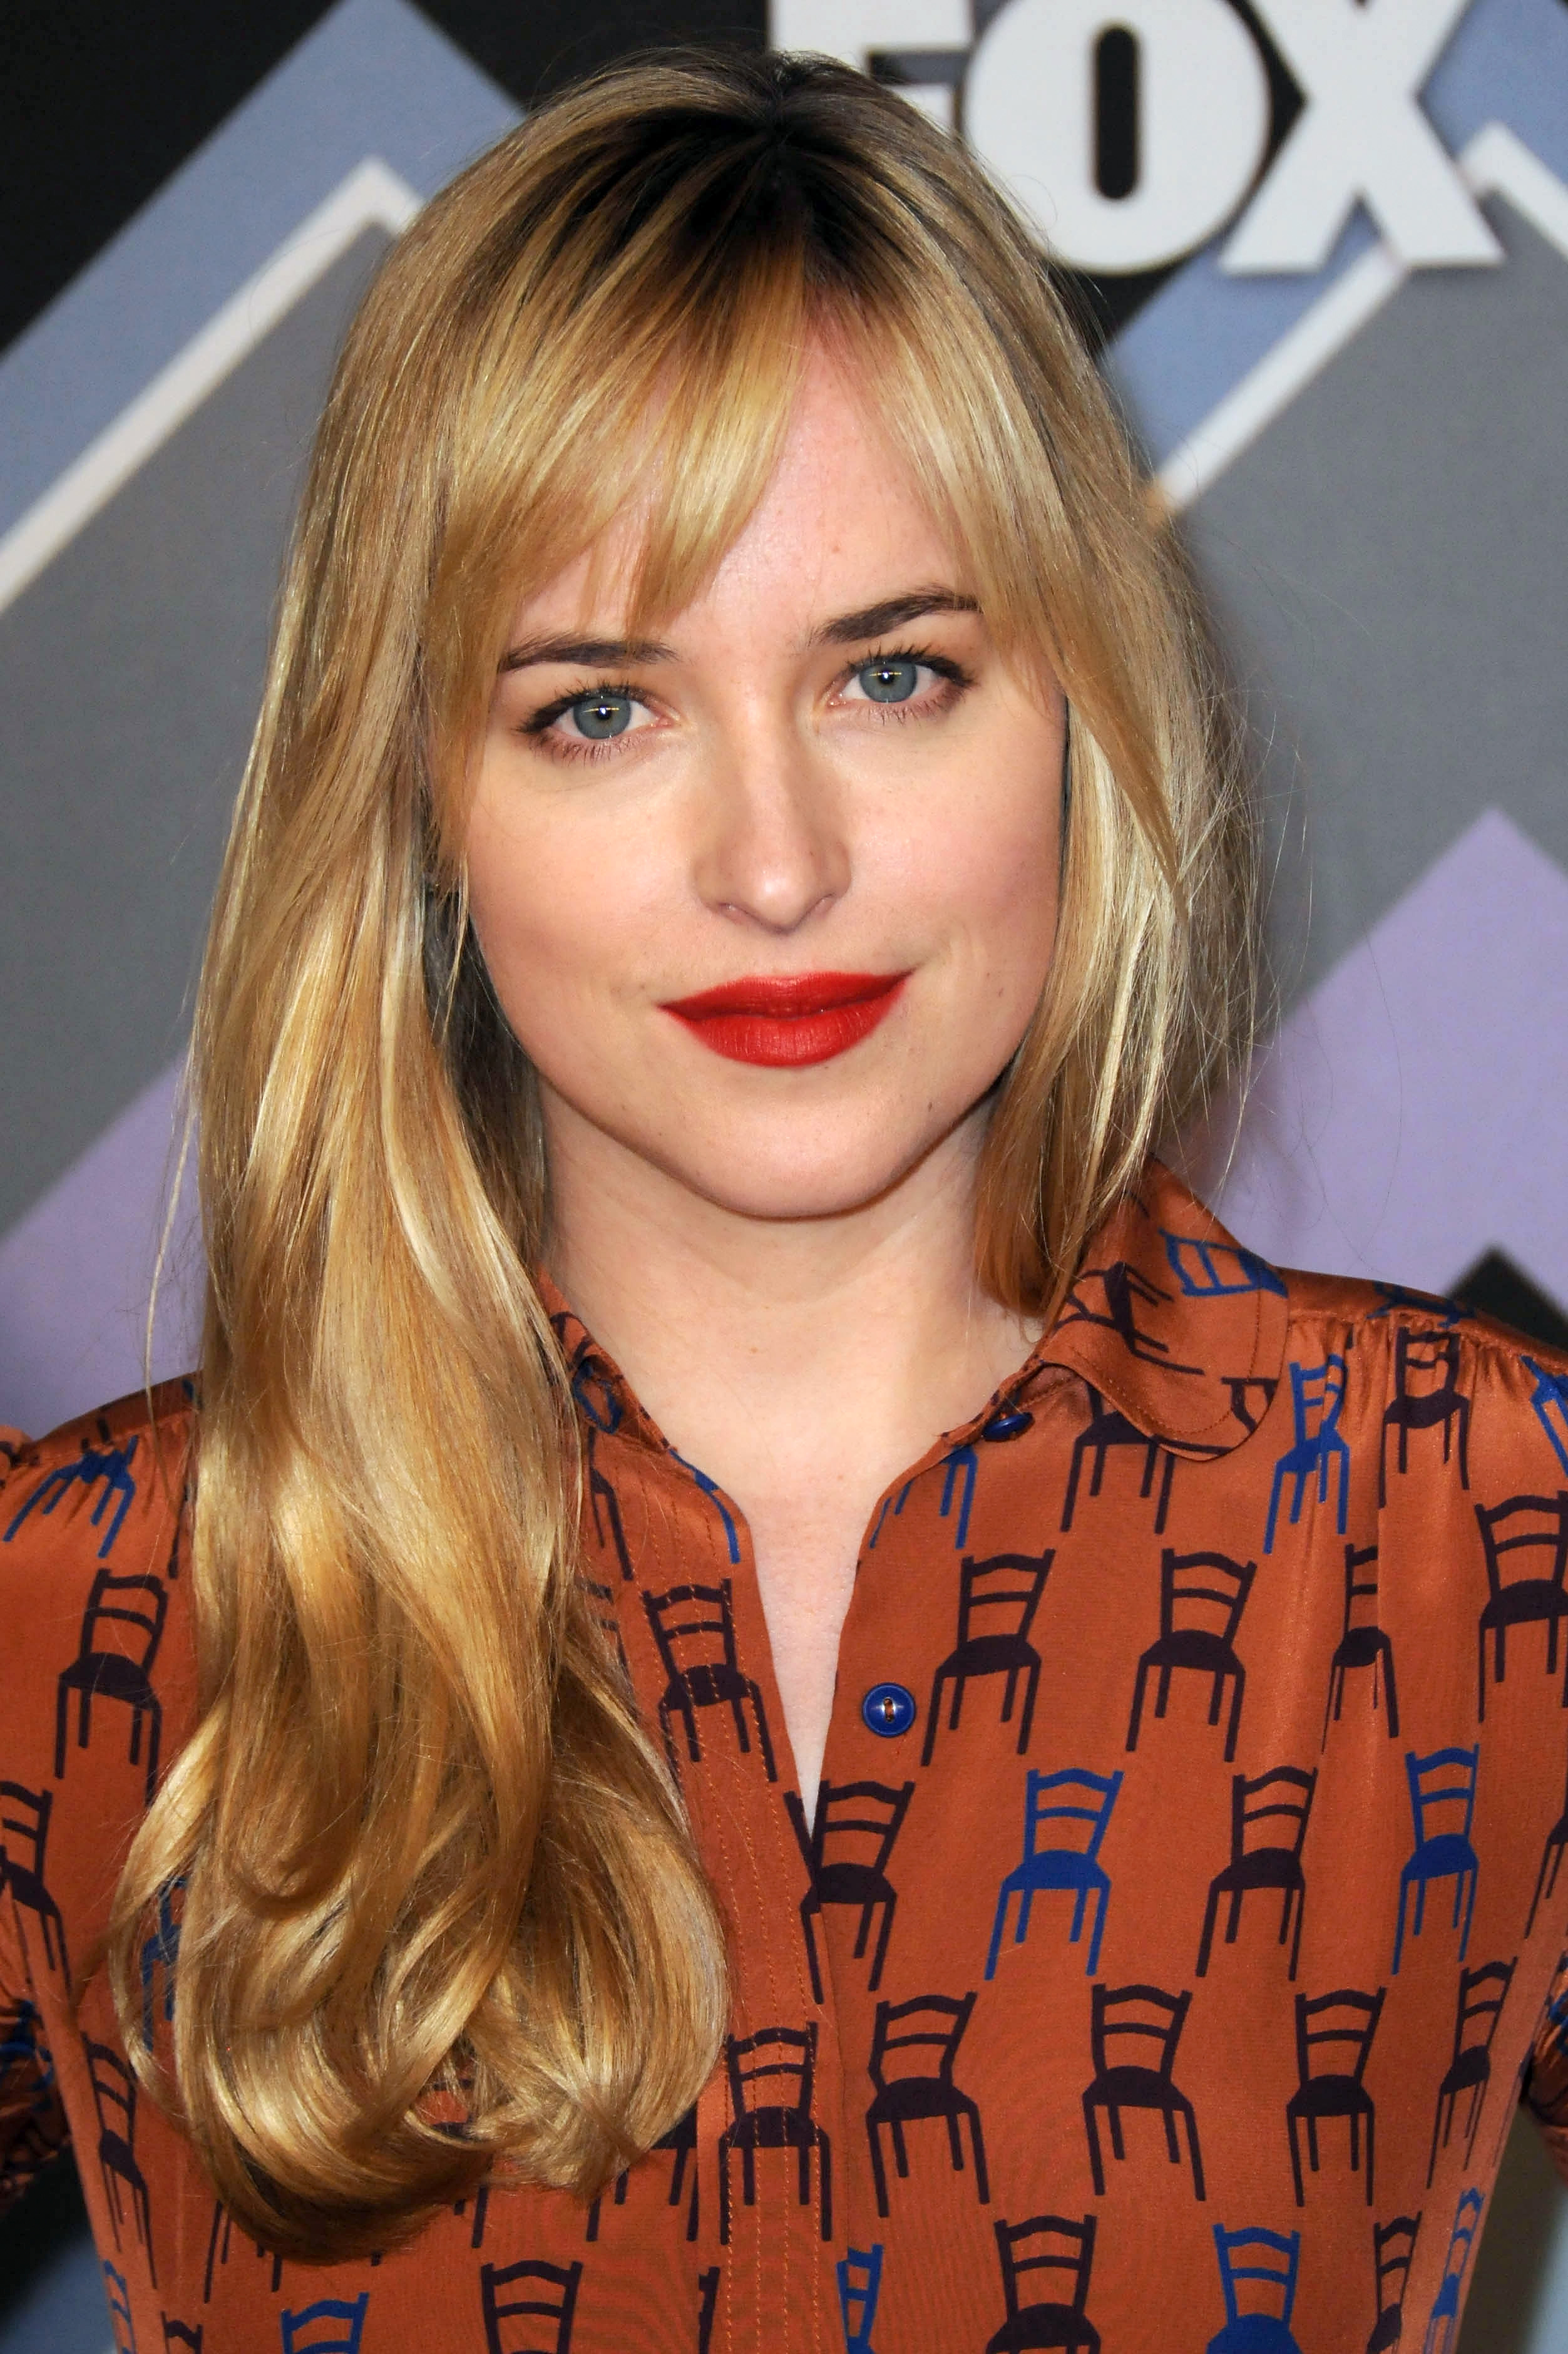 Dakota Johnson attends the 2013 TCA Winter Press Tour on January 8, 2013 in Pasadena, California | Source: Getty Images